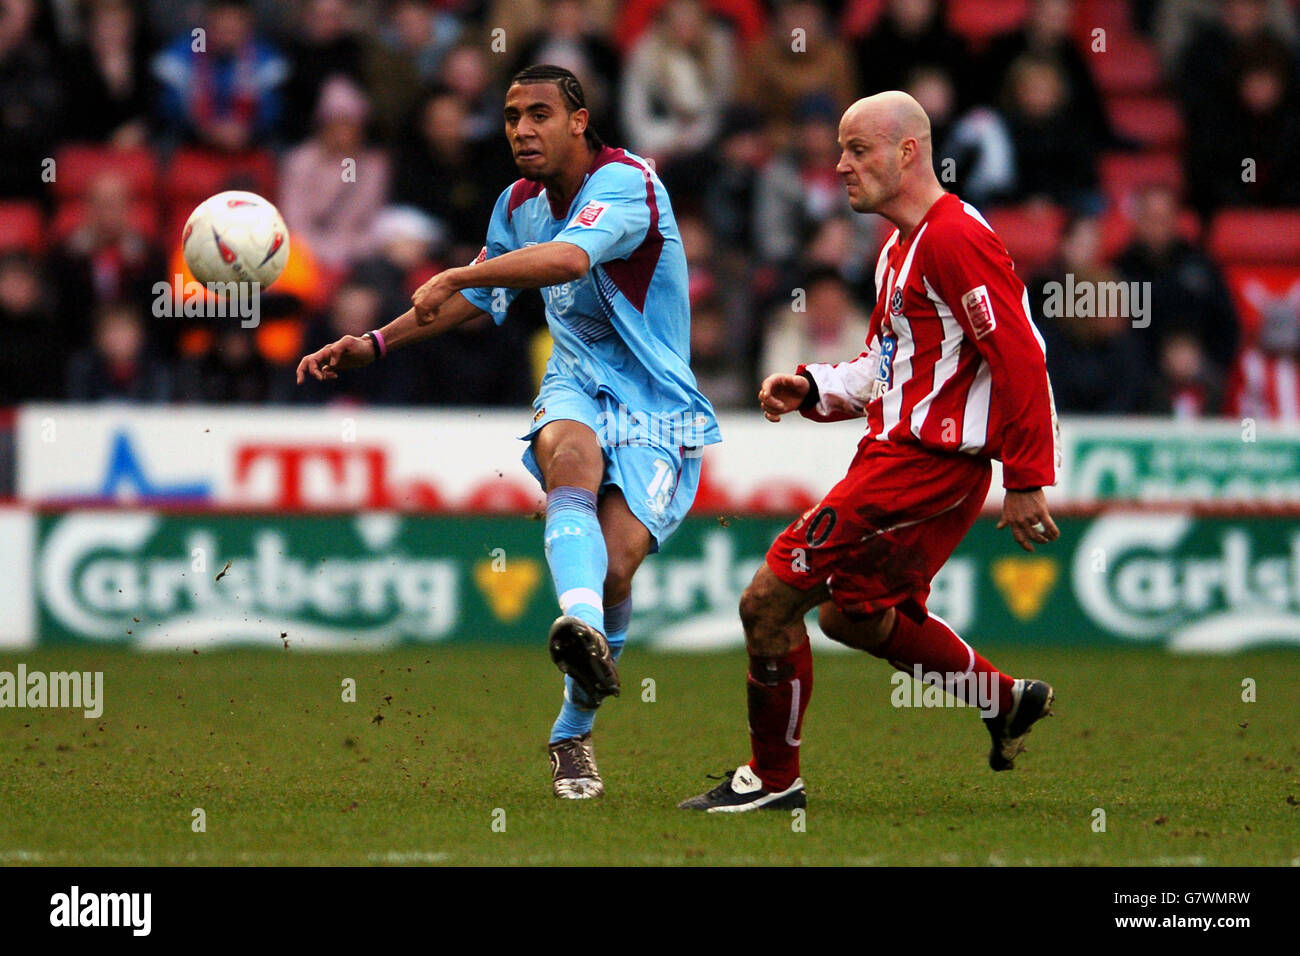 Soccer - FA Cup - Fourth Round - Replay - Sheffield United v West Ham United - Bramall Lane. West Ham United's Anton Ferdinand (l) plays the ball past Sheffield United's Paul Shaw (r) Stock Photo